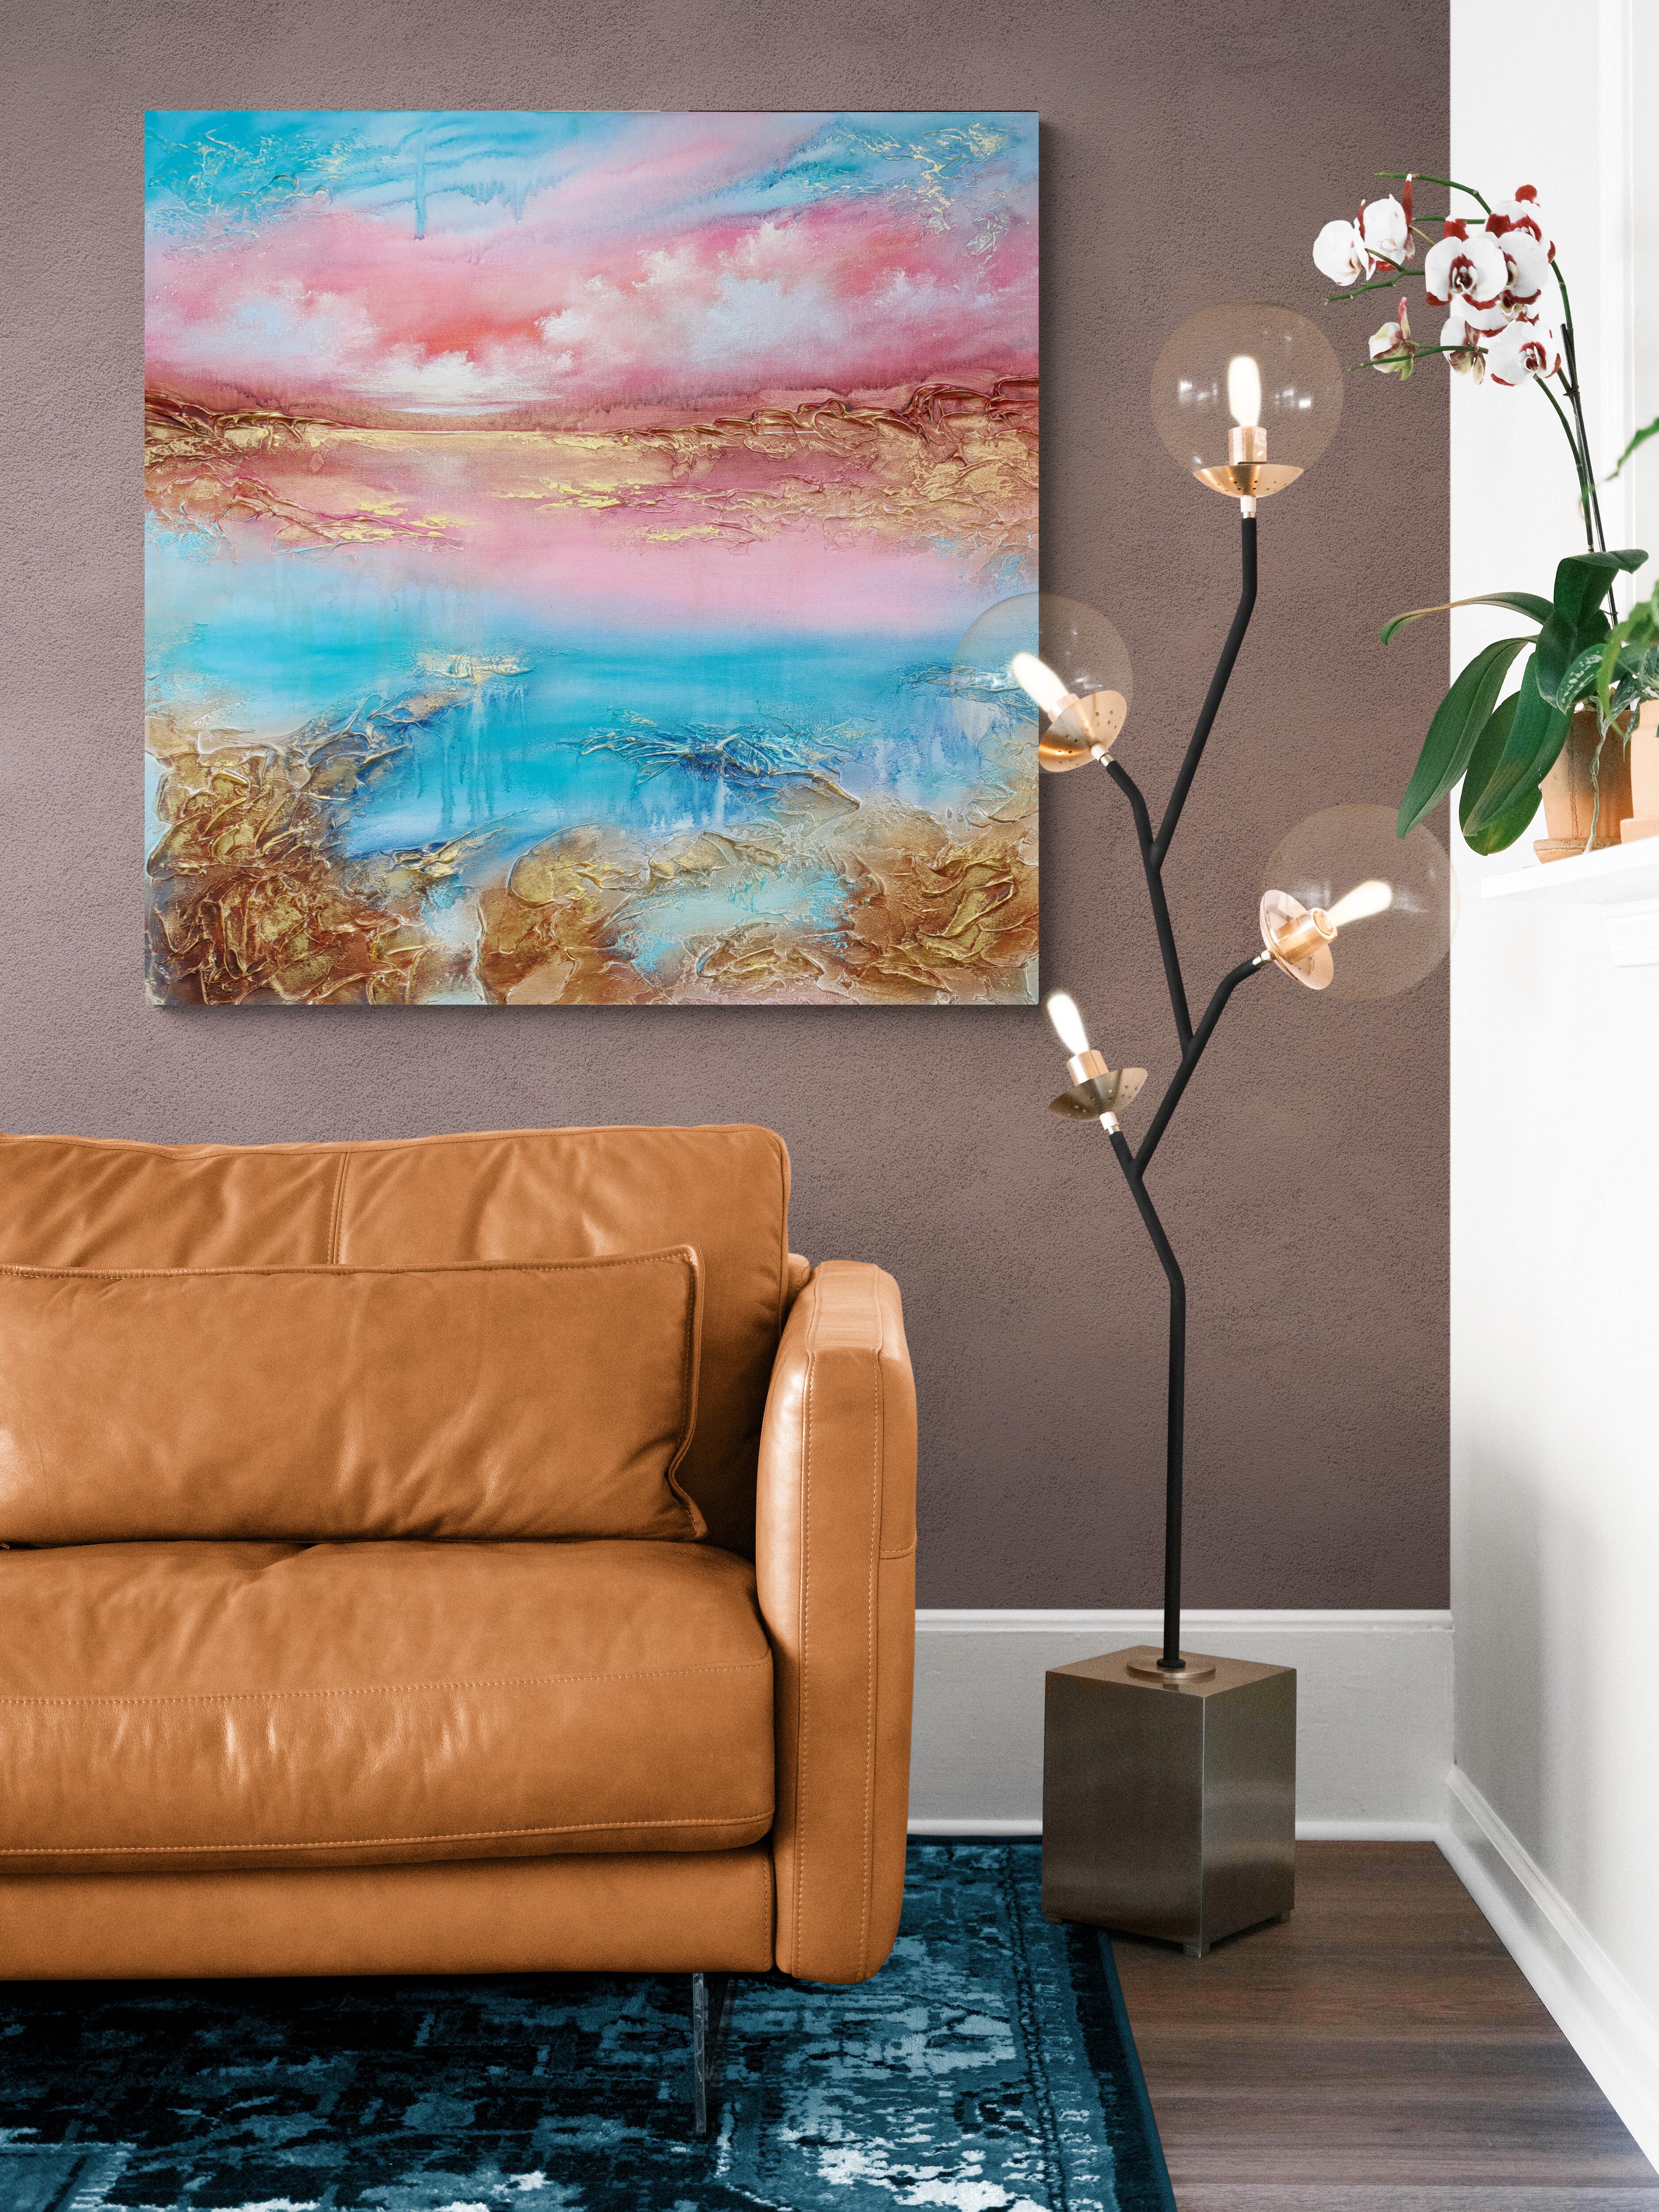 A large semi-abstract beautiful structured mixed media painting with painted edges, so it can be hung immediately without framing.

This painting has a lot of structures and layers. Acrylic mixed media. The structure aspect and metallic colors come